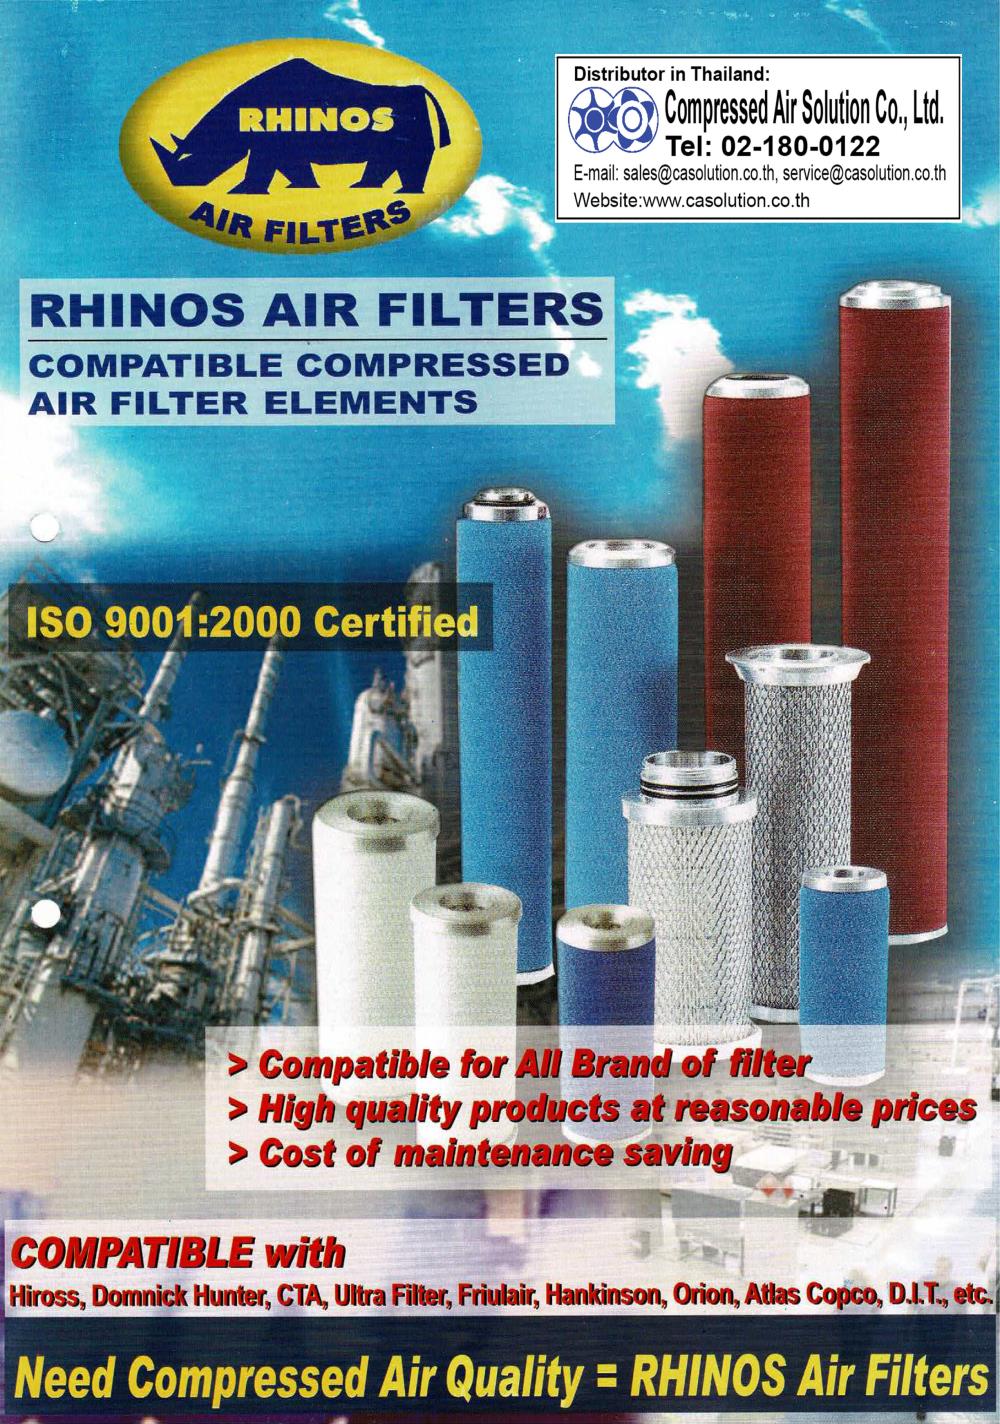 RHINOS Compatible Compressed Air Filter Elements,Compressed Air Filter Elements,RHINOS,Machinery and Process Equipment/Filters/Filter Media & Filter Element